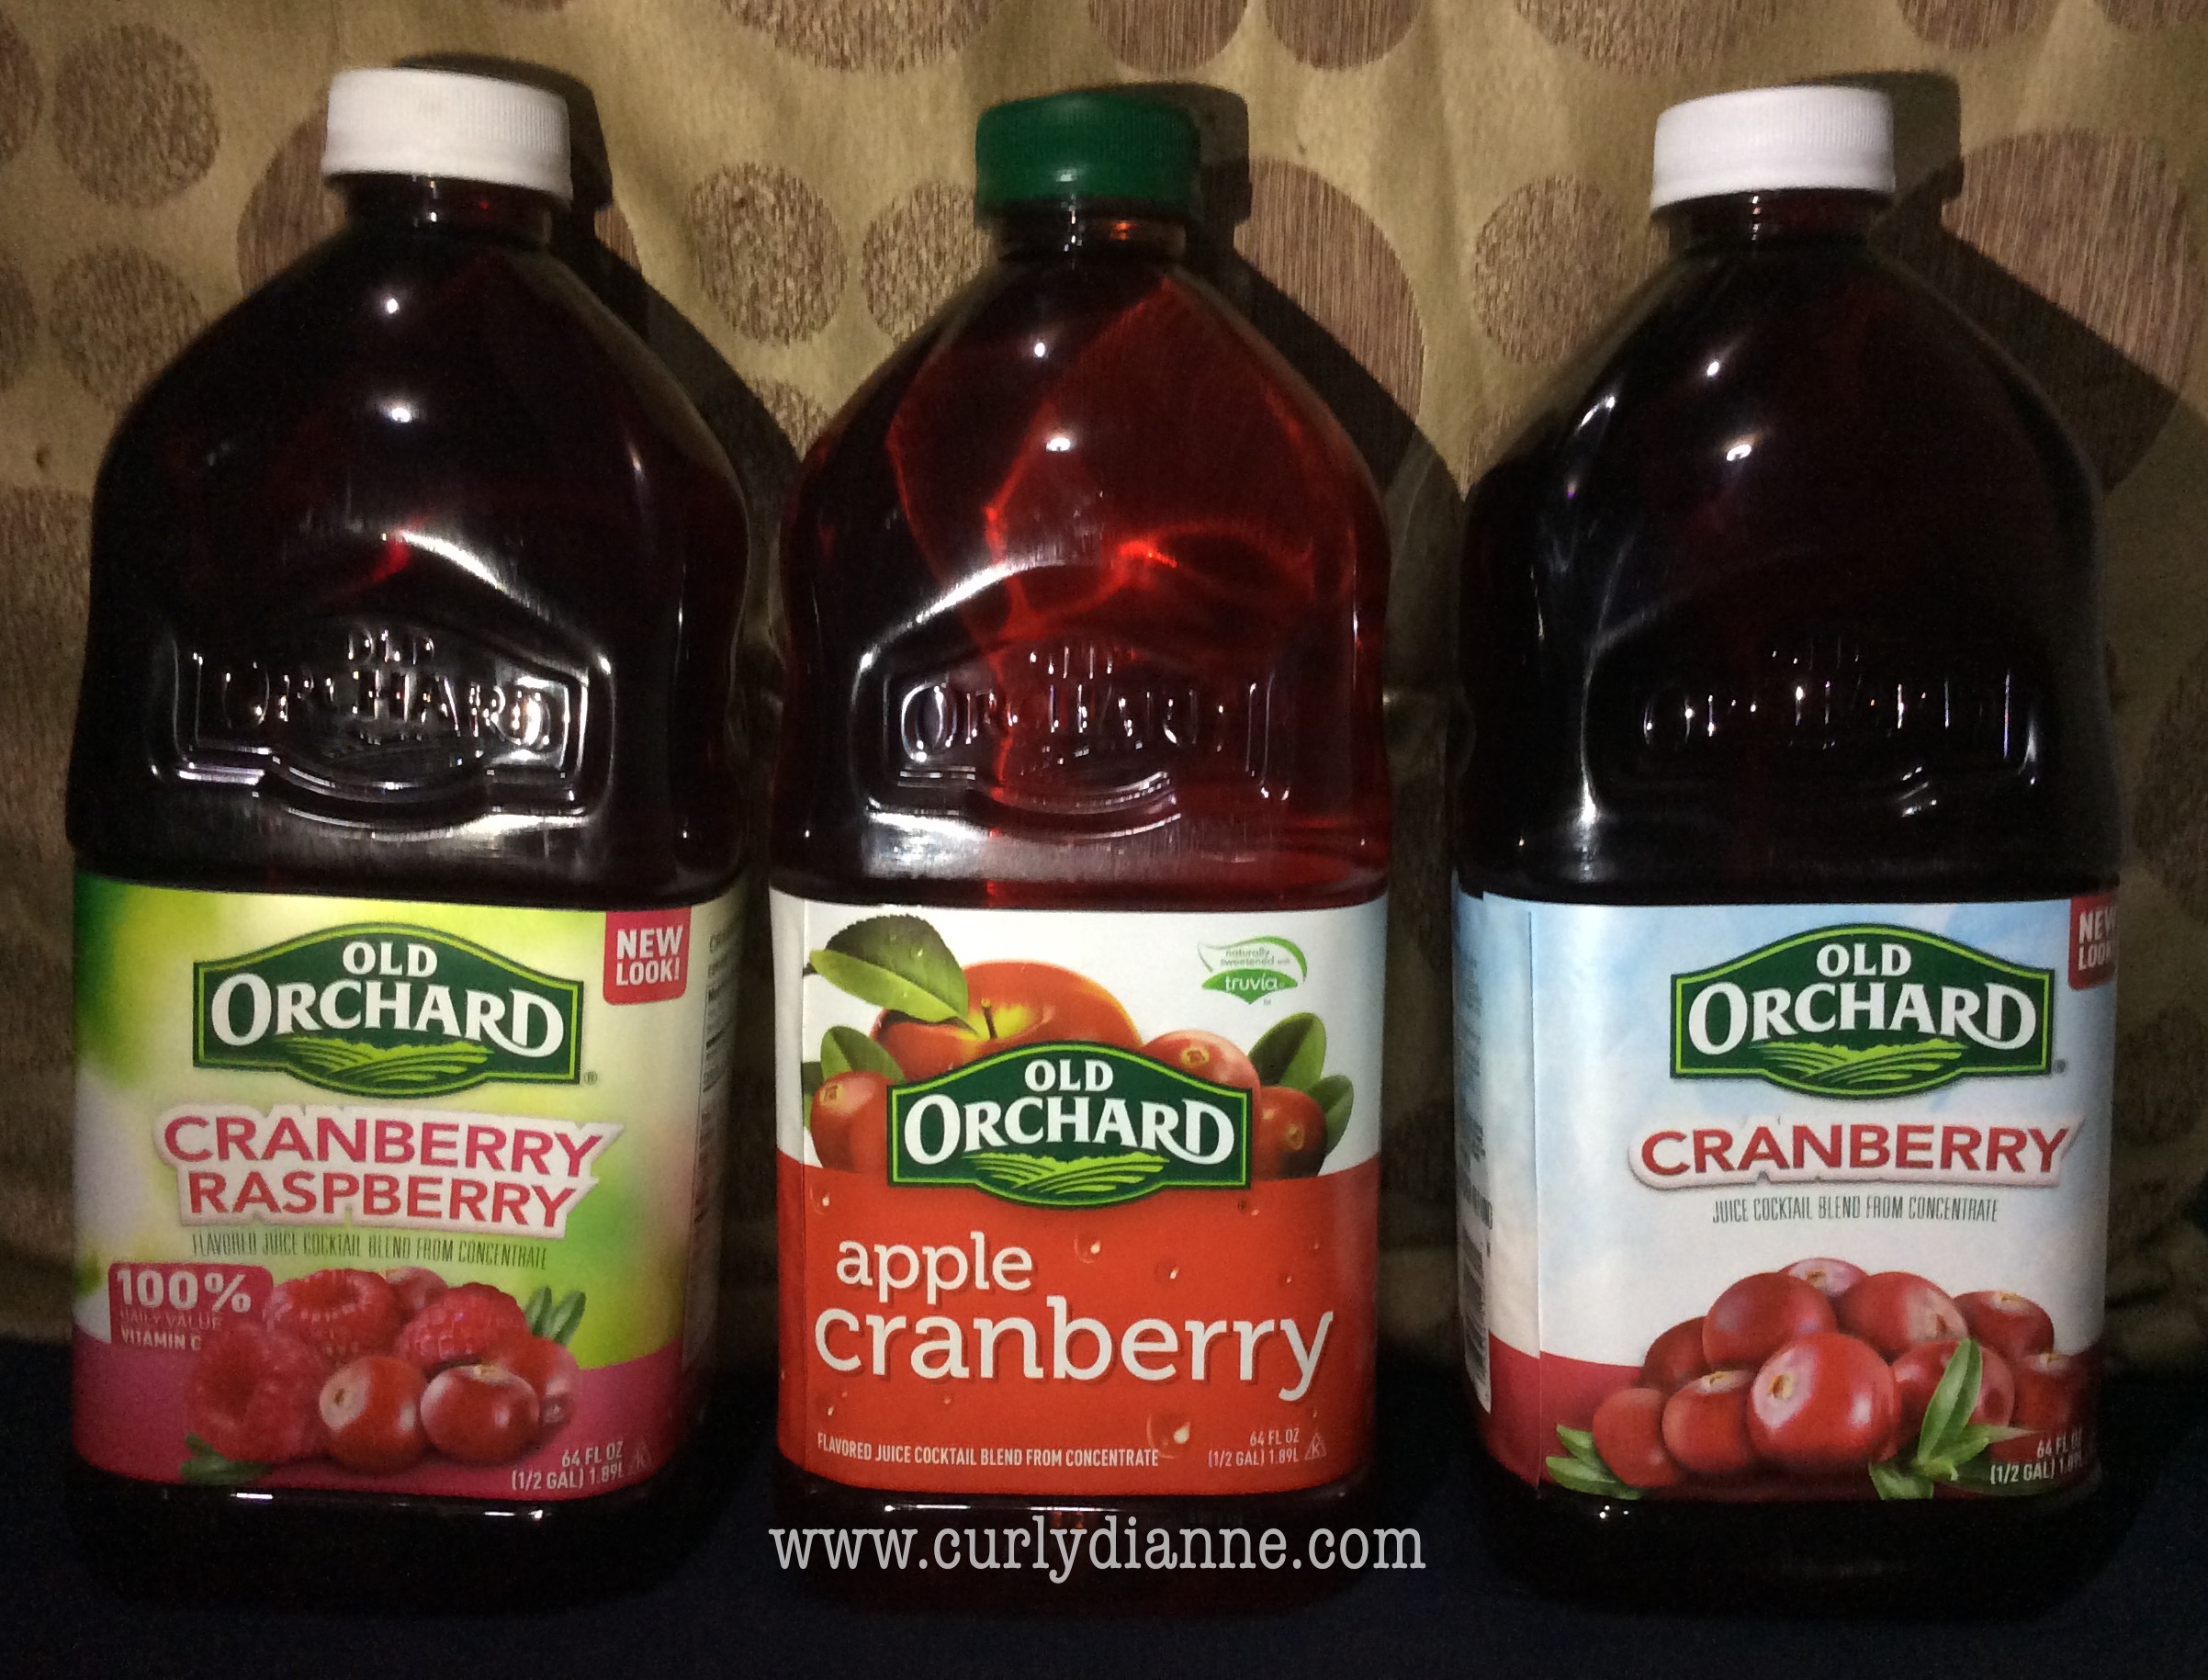 Old Orchard Cranberry: Be Creative and Get a Chance to Win Prizes ...